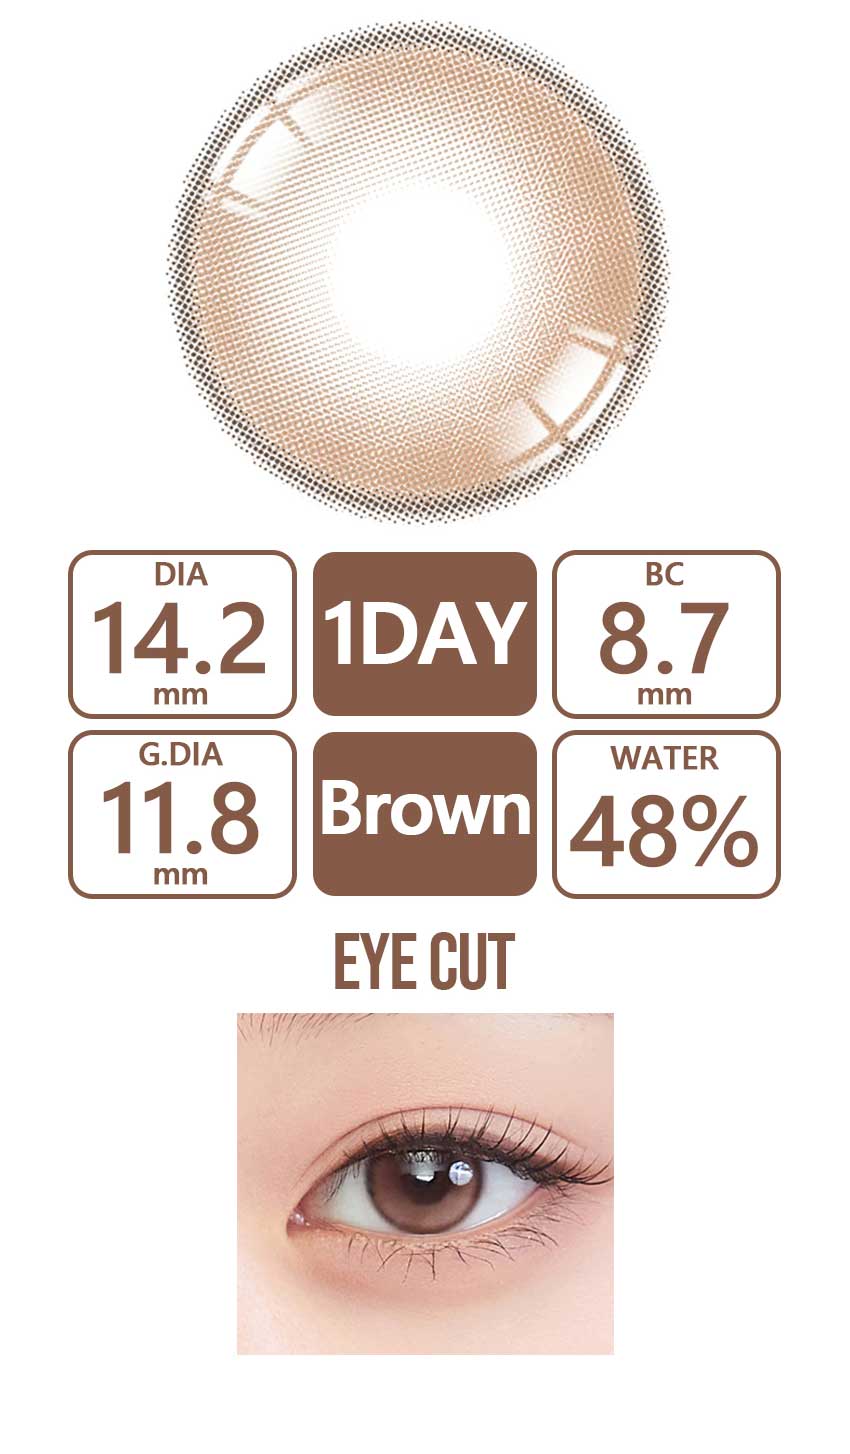 queenslens,queencontacts,brown,colored contacts, natural, 1day, 1month, monthly, dewy,hapakristin